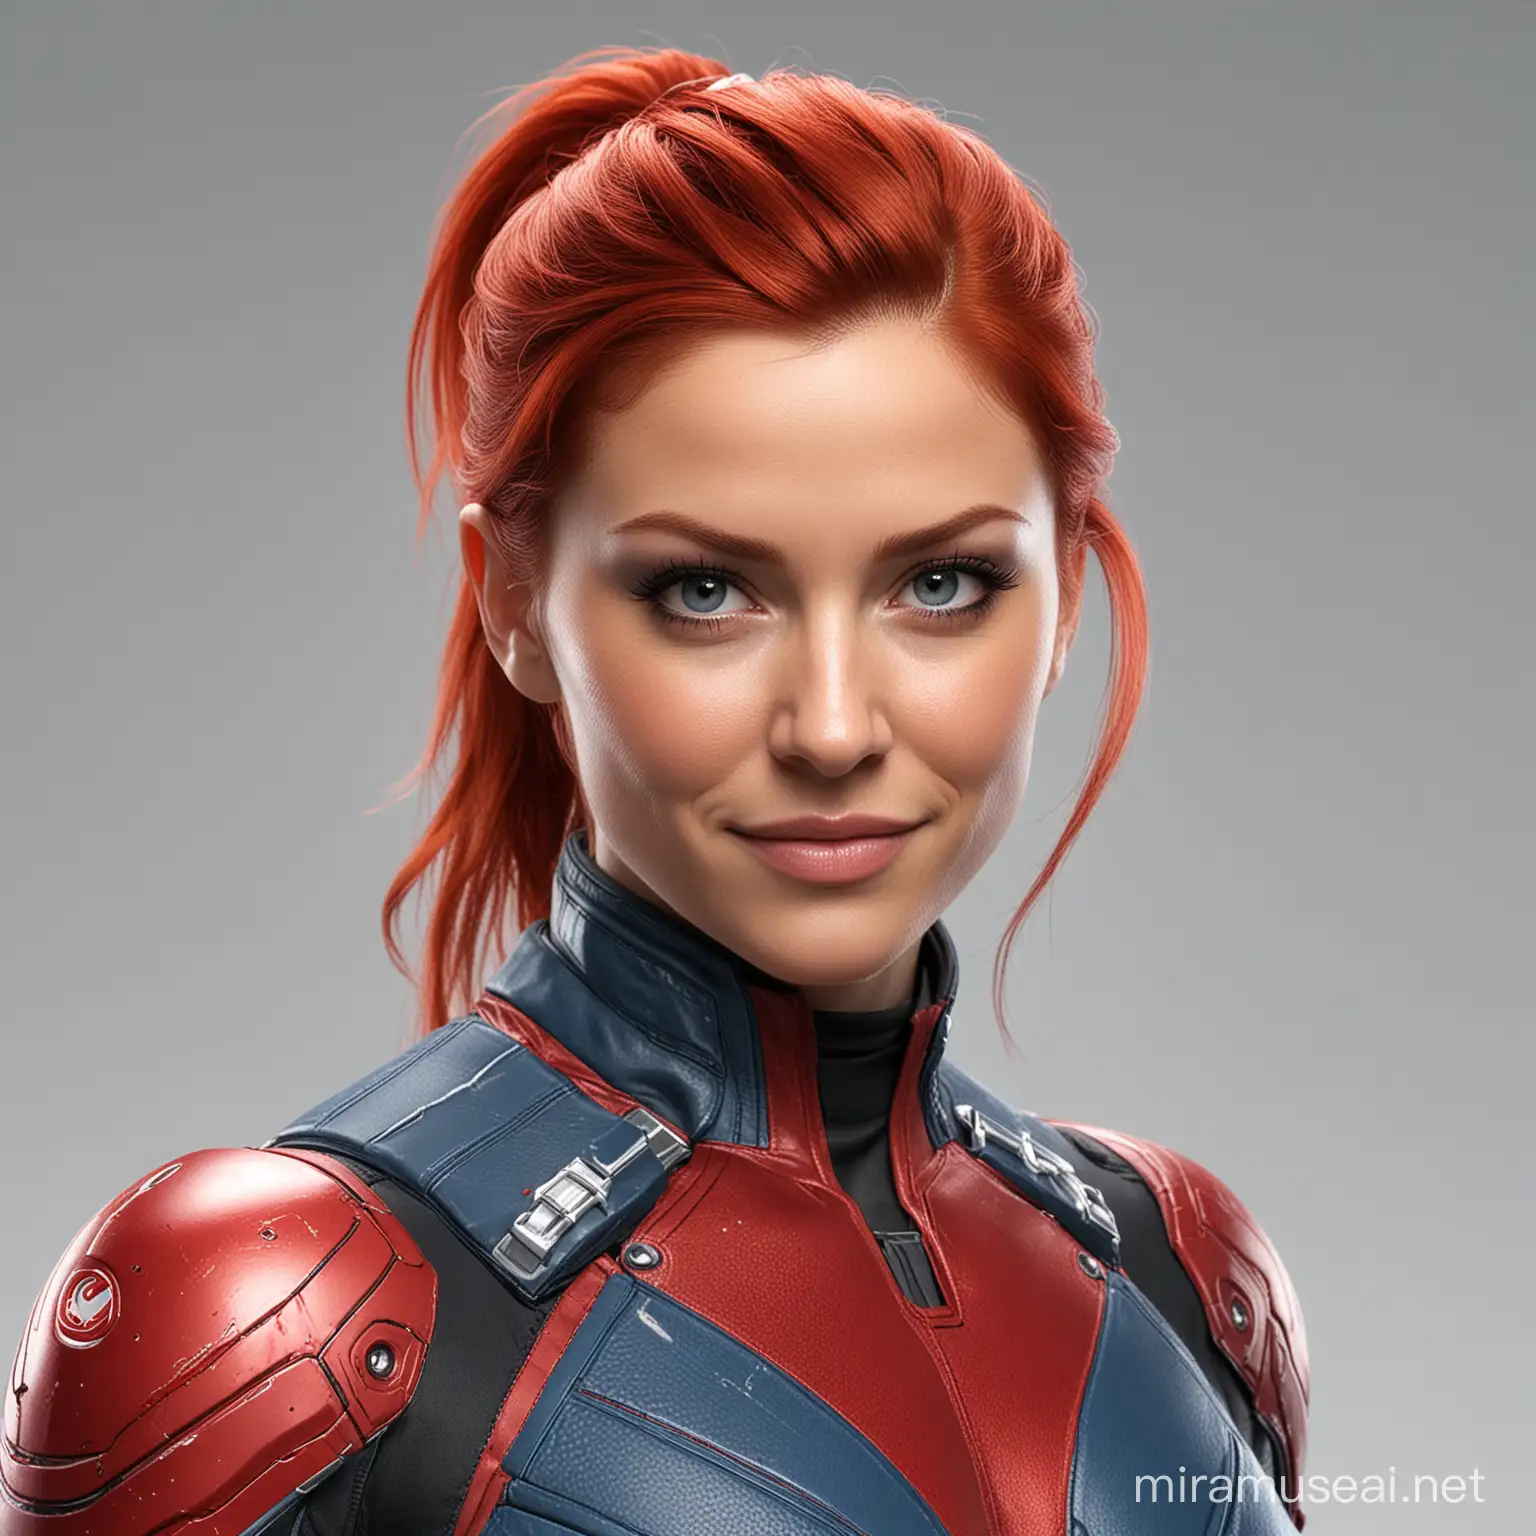 Marvel-style character from the future, similar to Viper, ponytail red hair, with 29 years old, rounded face, facing the camera, head close up, smiling face, no colored marks or scars in the face.

Attire: Blue and red attire, futuristic style, no high colar, white background.

Background: clear white background

Photographed with: Canon 5D Mark IV, 60mm lens

Photo style: Portrait, facing to the camera

Description: soft skin, no beard, with a large forehead.